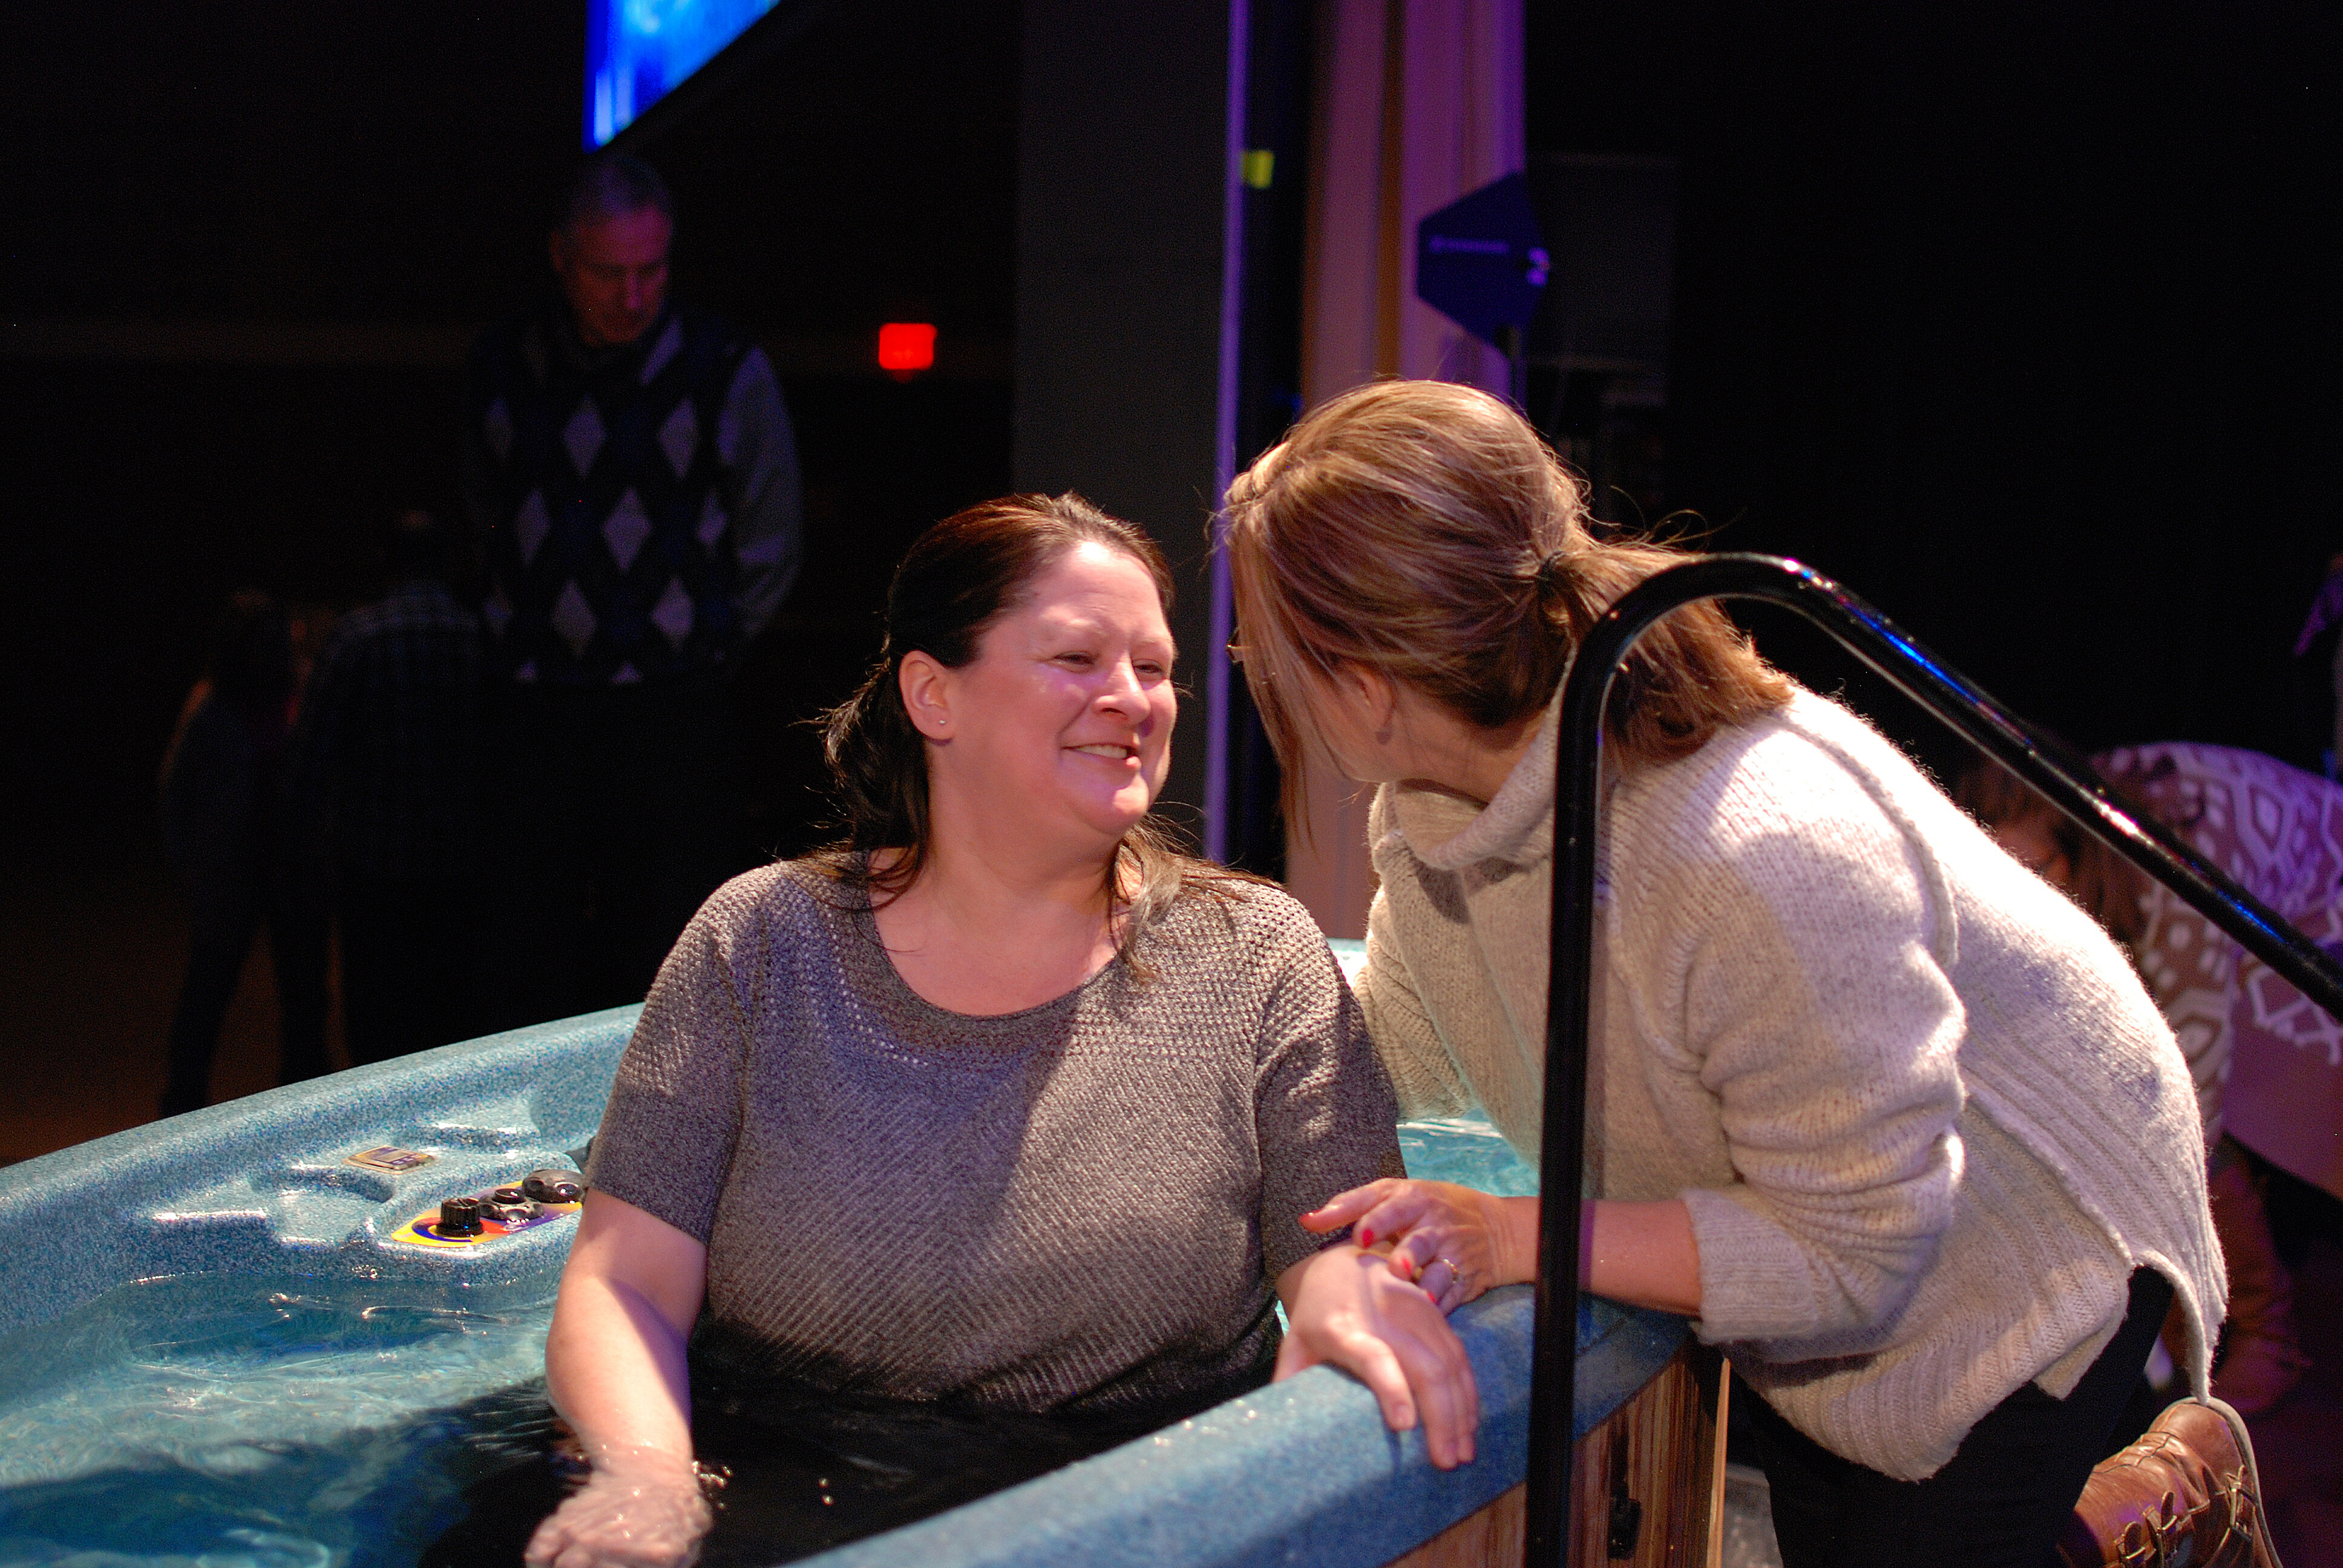 Michele Smith calls baptism life-changing